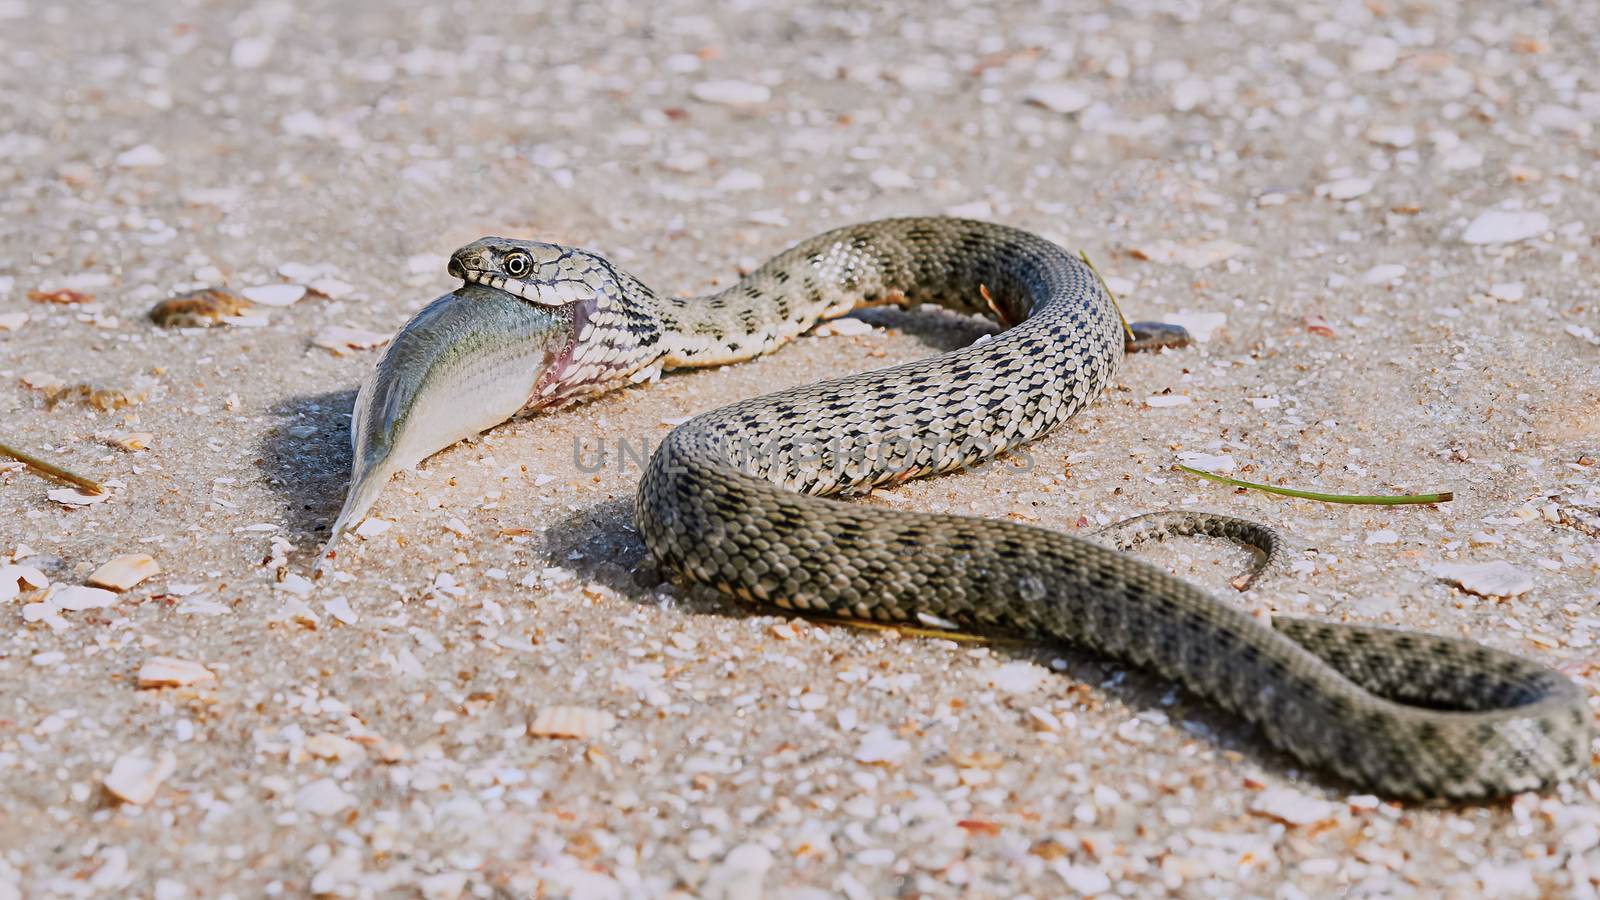 Sea fish in the mouth of a water snake